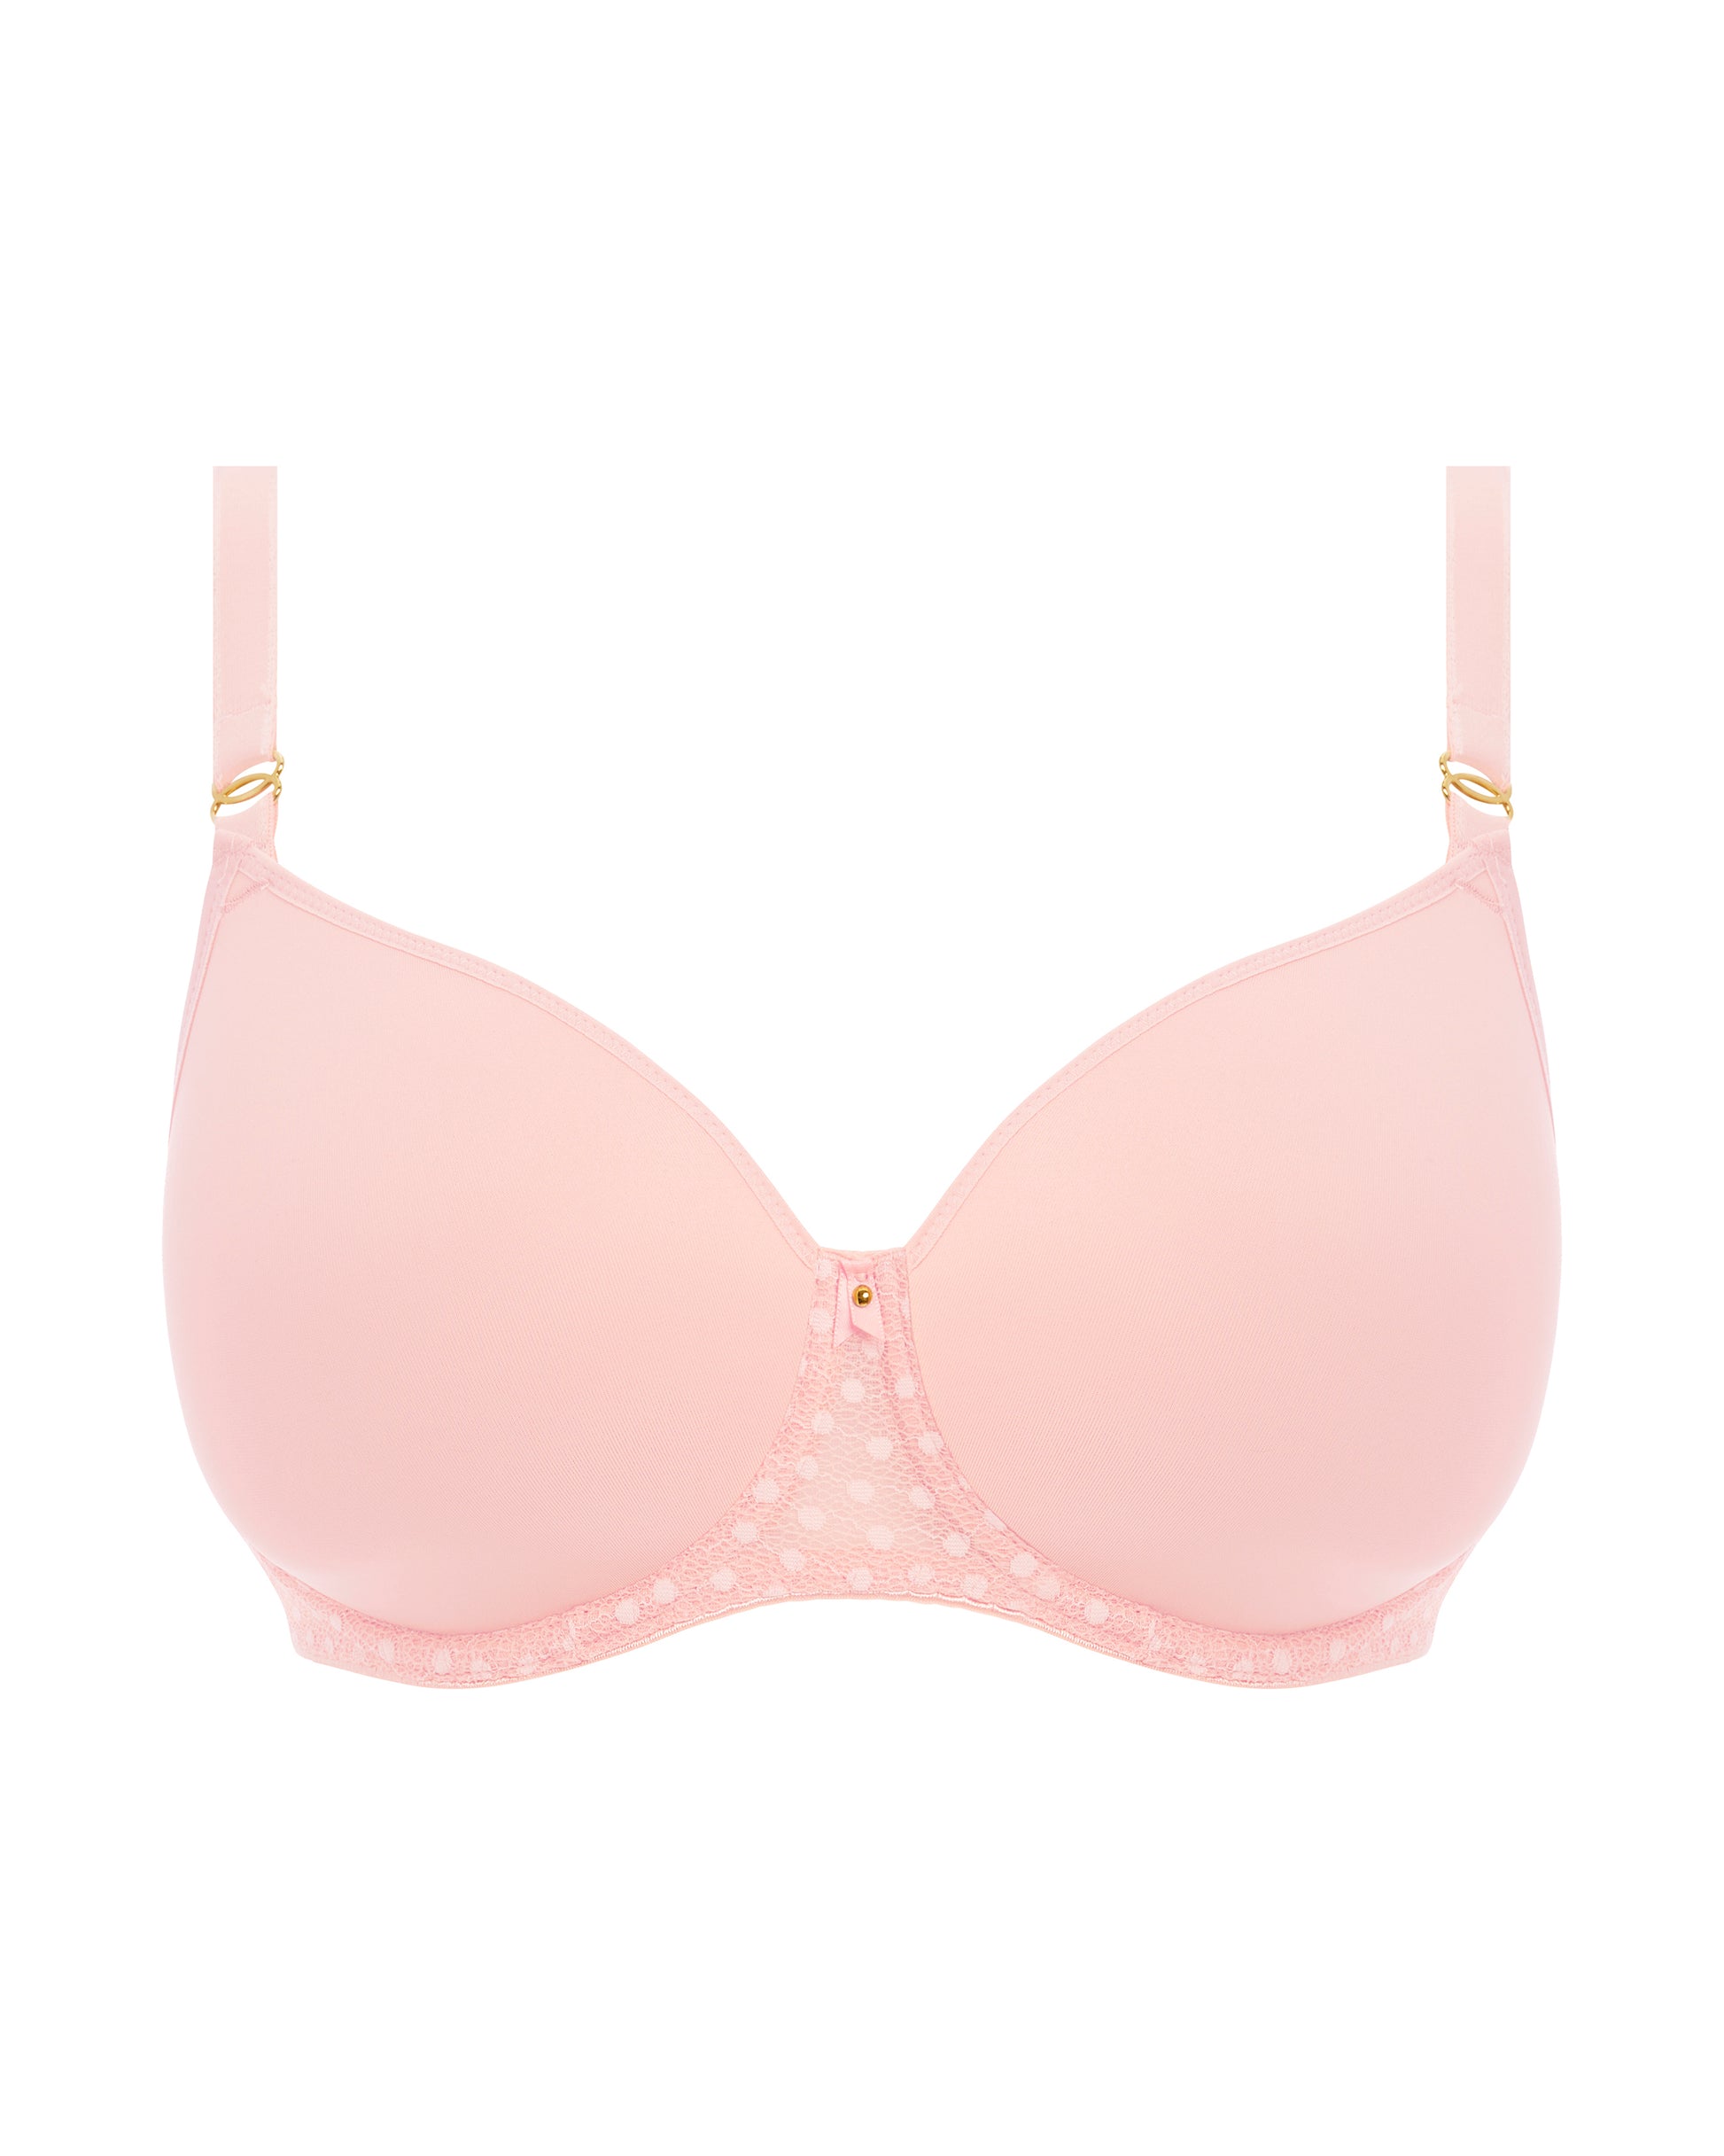 Flat lay of a molded t-shirt underwire bra in pink